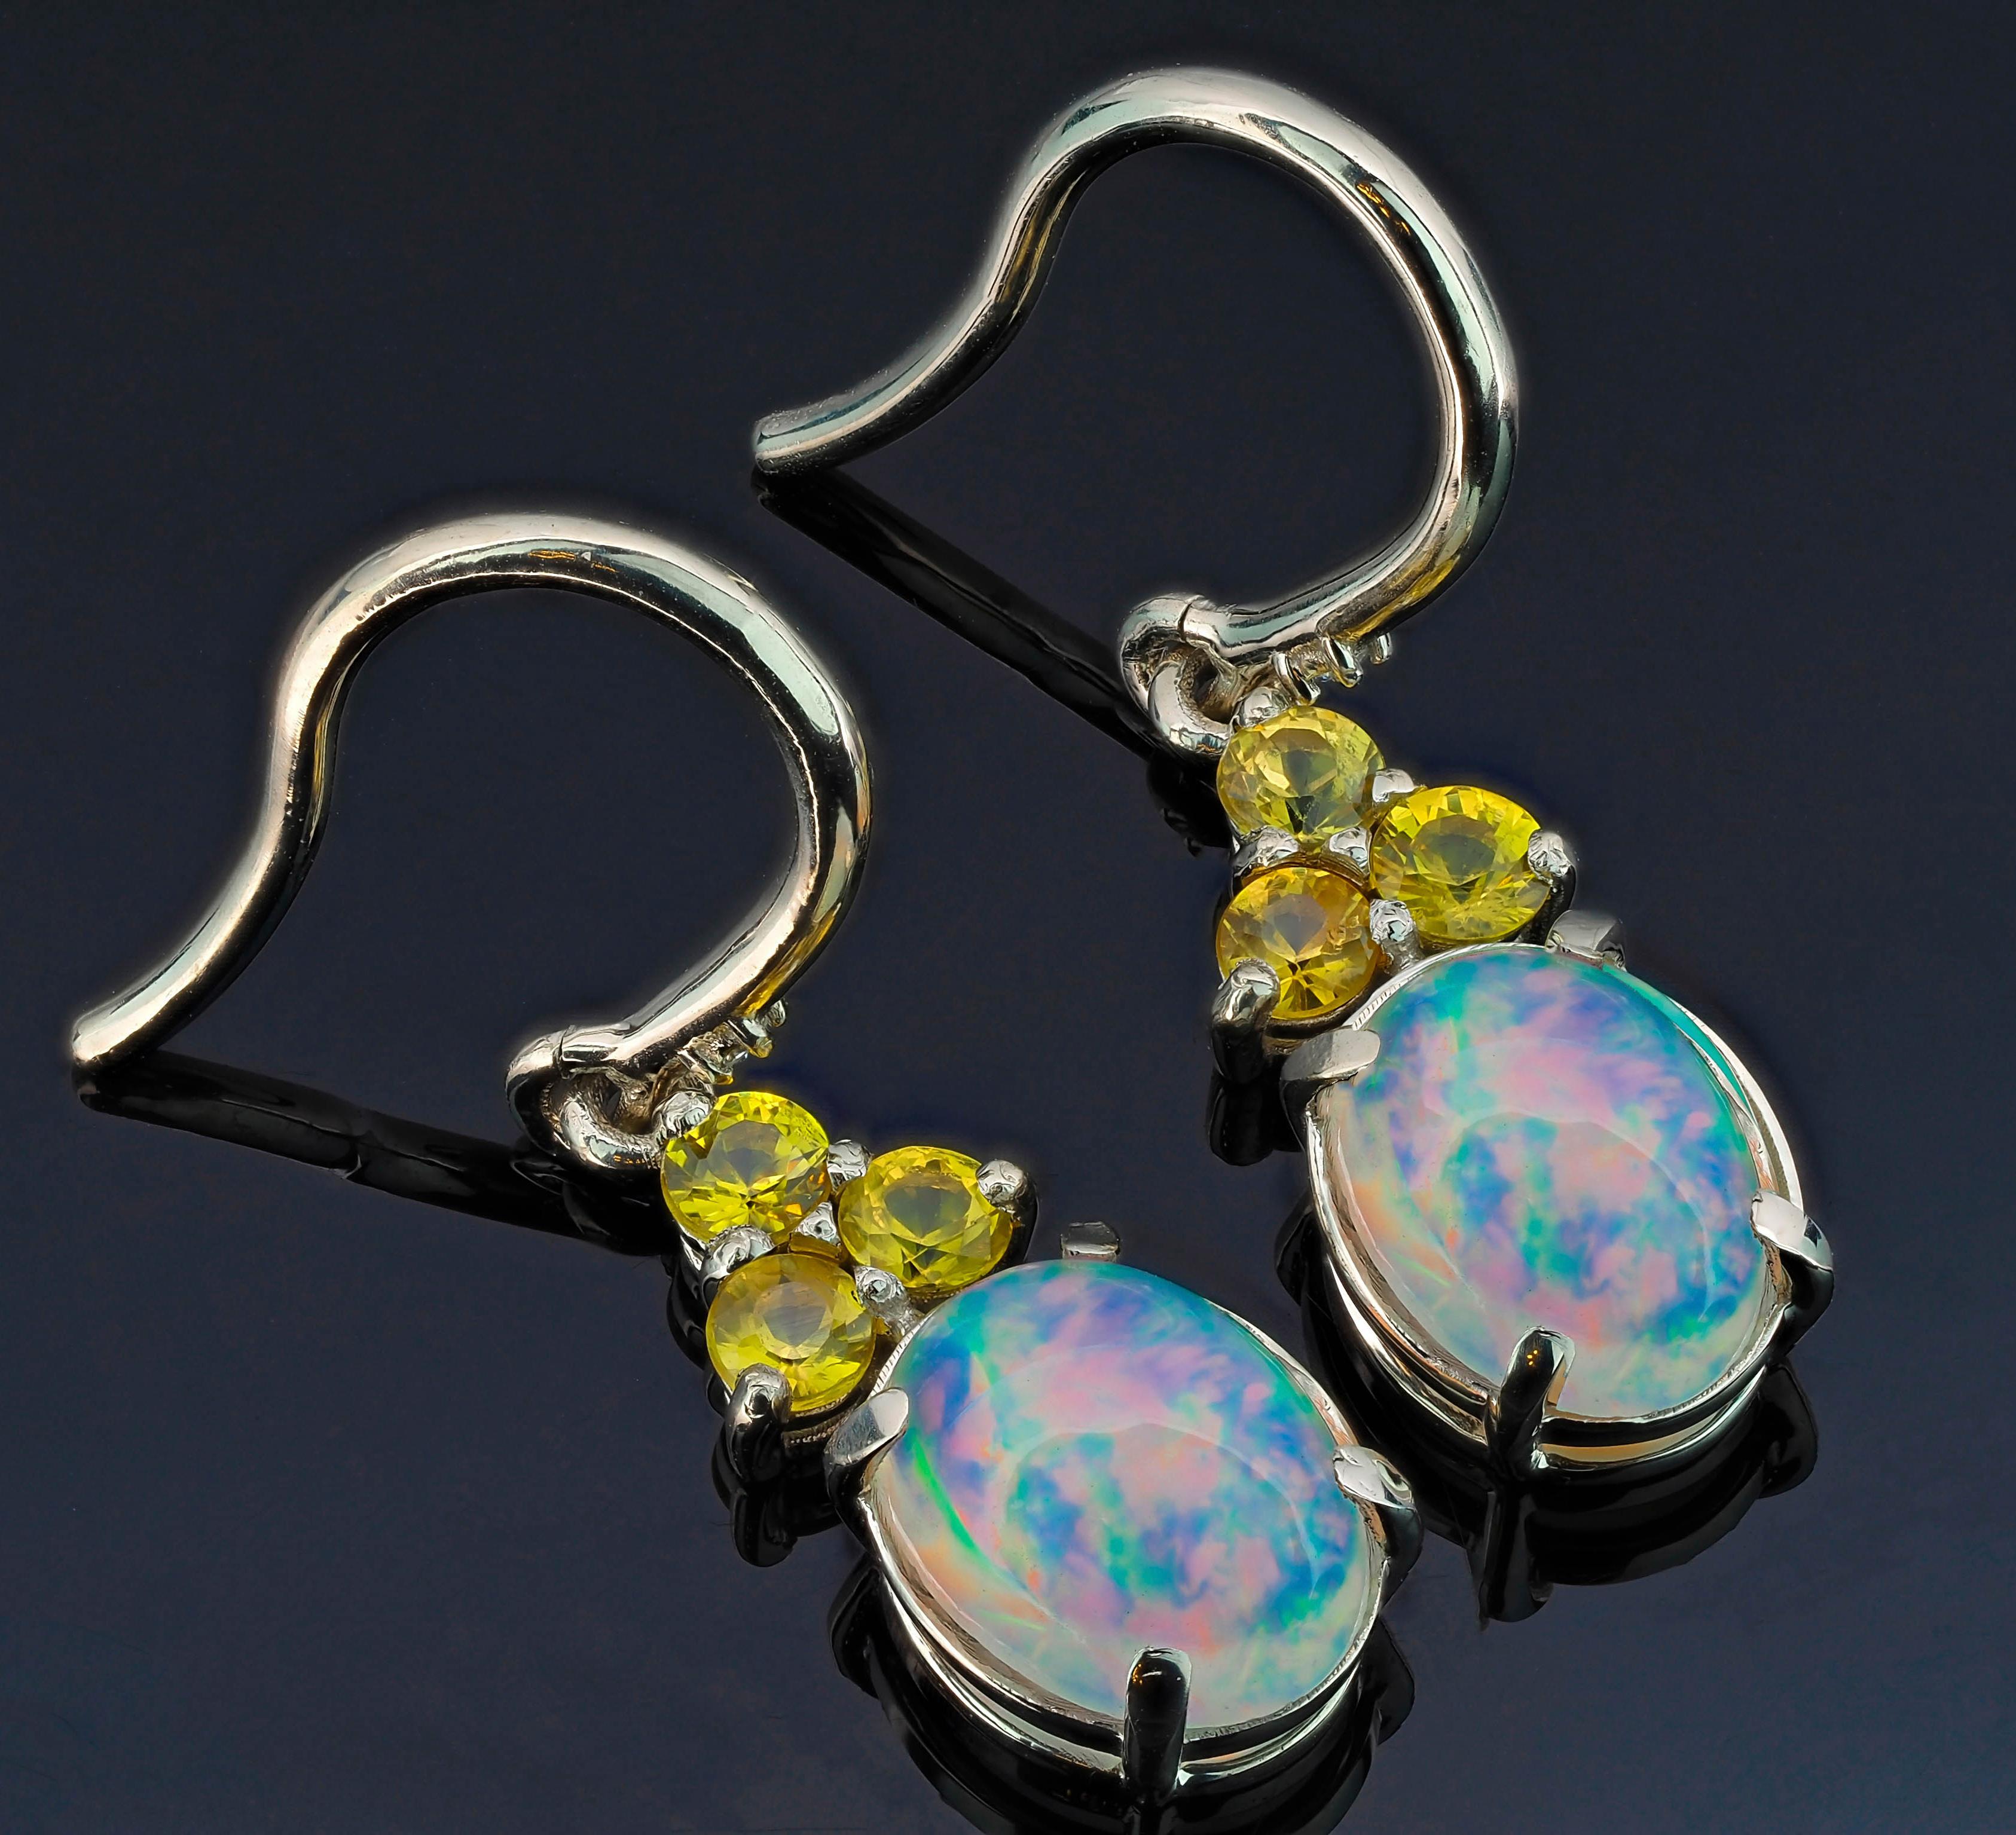 Opal, sapphire 14k gold earrings. 
Vintage opal earrings. Ethiopian opal earrings. October Birthstone earrings. Oval cabochon opal earrings.

Metal: 14k gold.
Weight: 2.5 g.
Size 25x 6 mm.

Set with Opals 2 pieces, color - mix colors
Oval cut, aprox